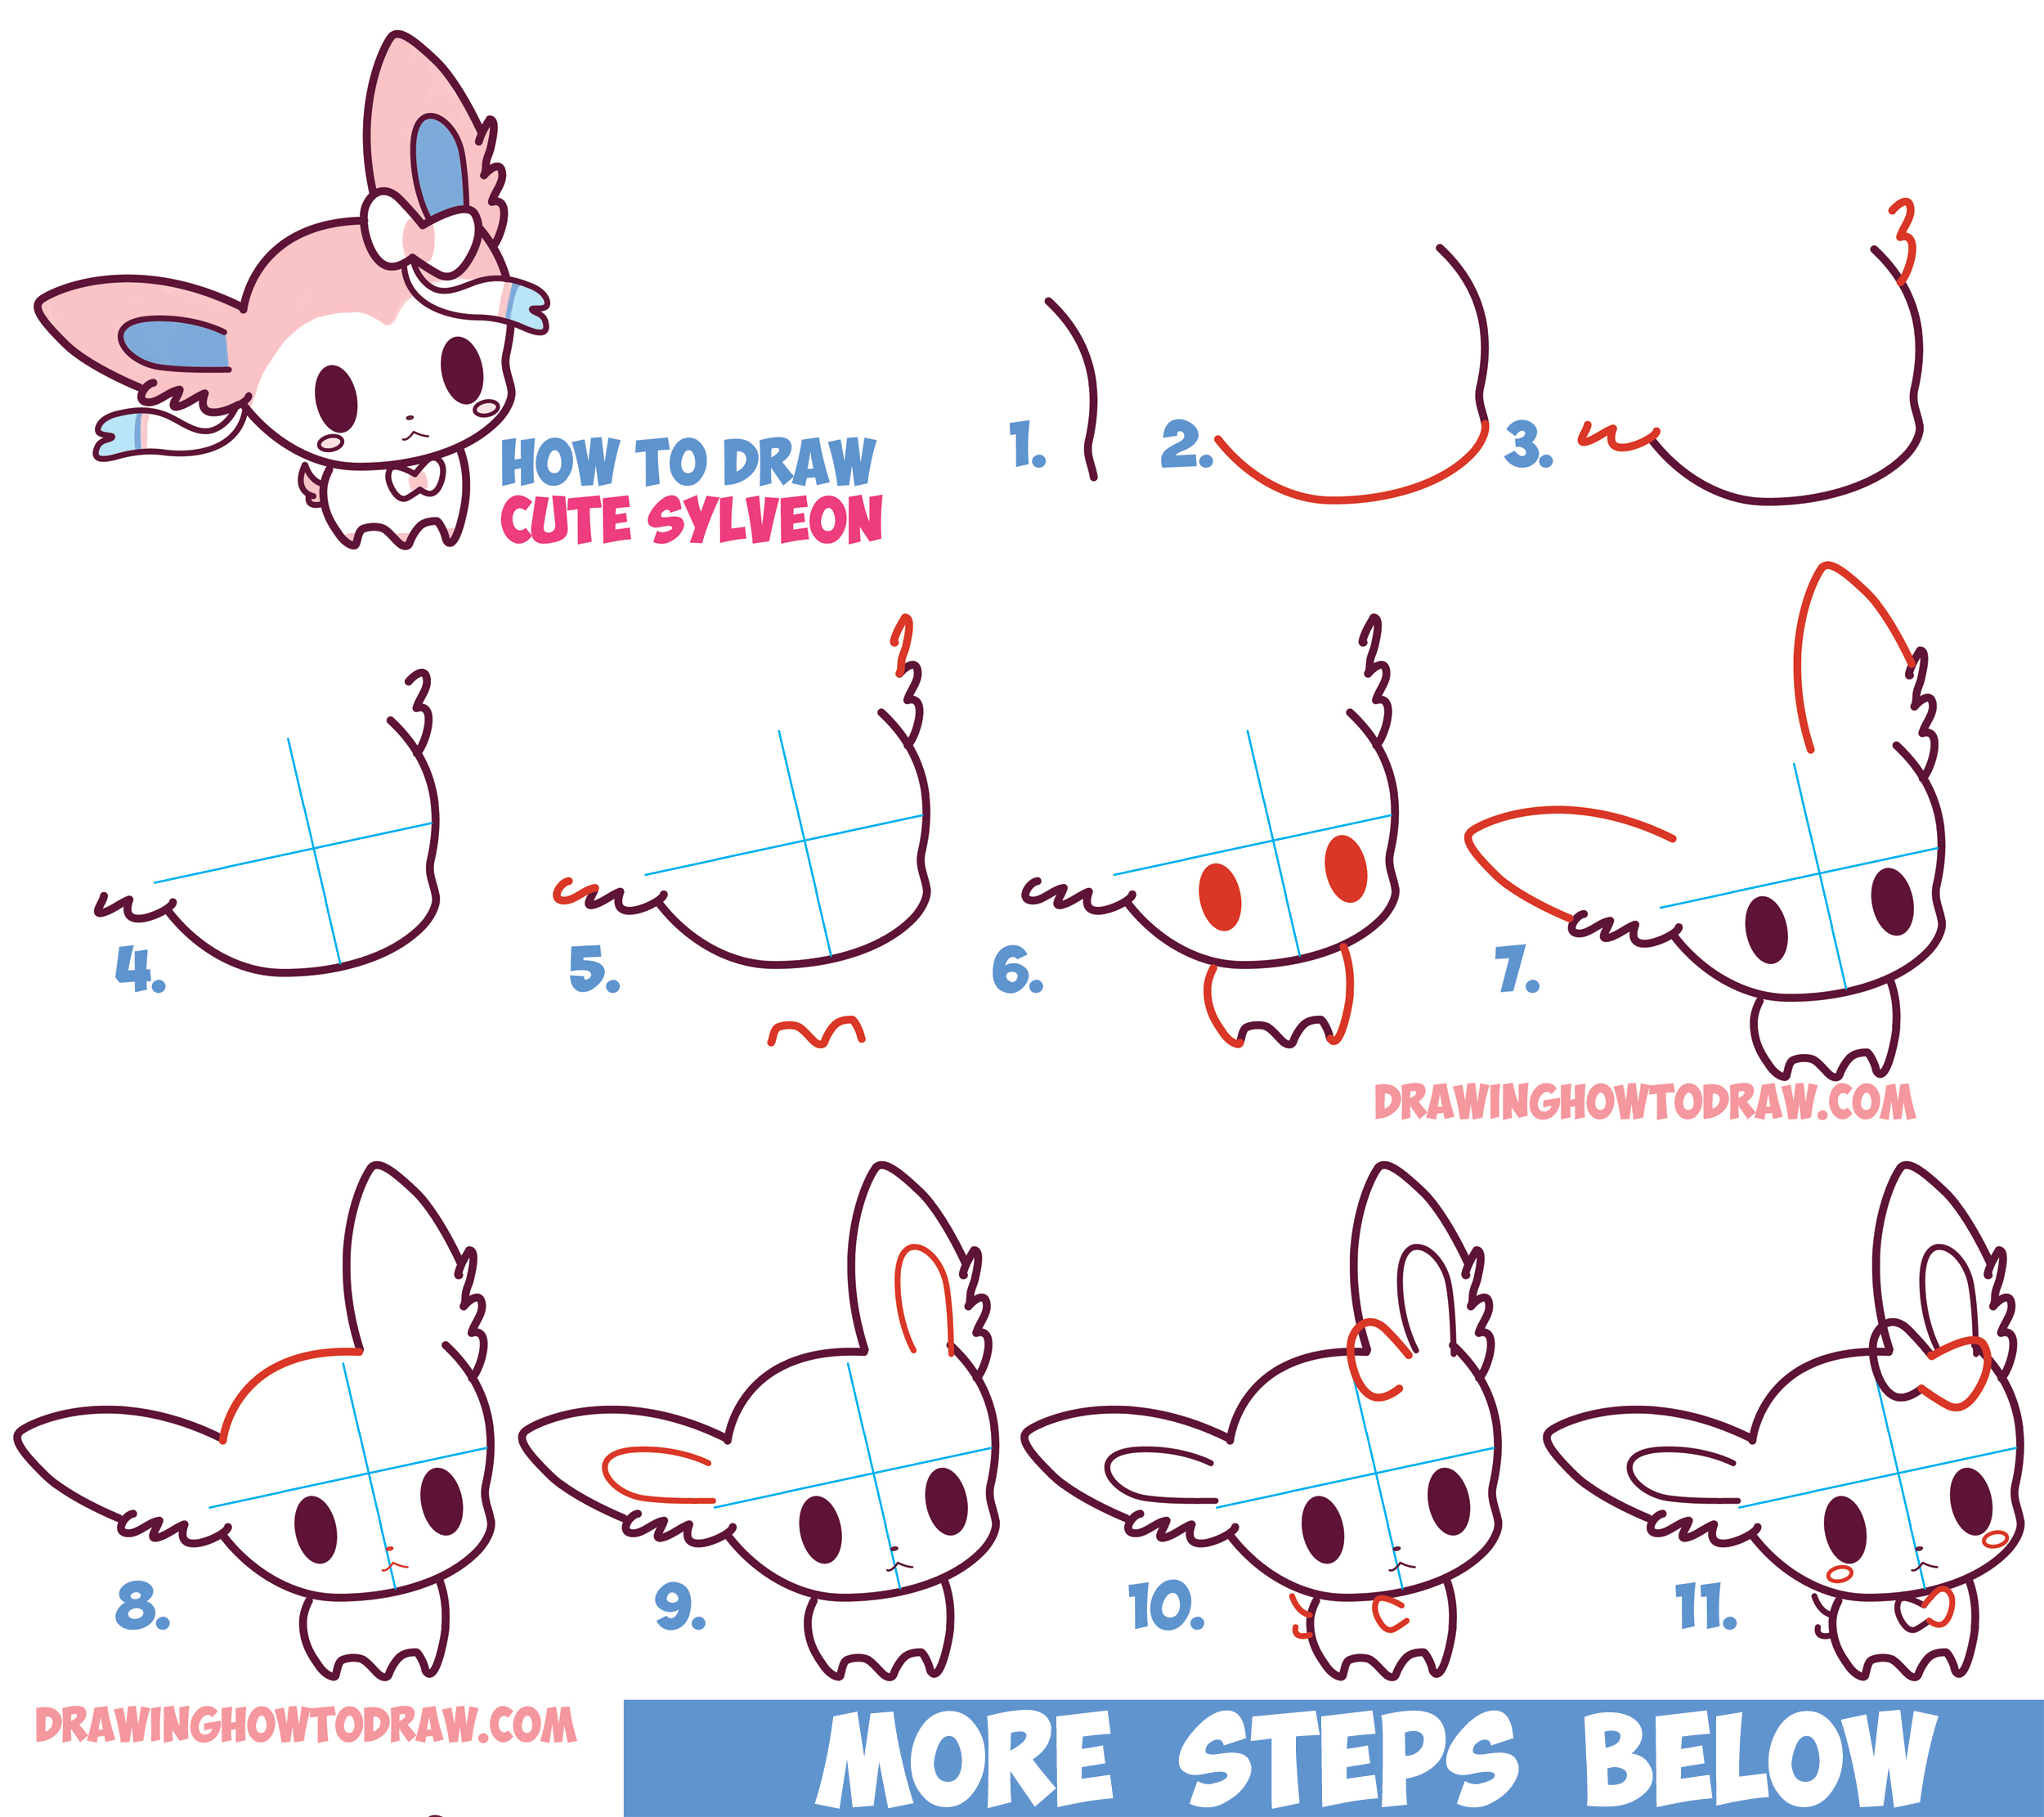 How to Draw Cute Chibi Kawaii Sylveon from Pokemon in Easy Step by Step Drawing Tutorial for Kids